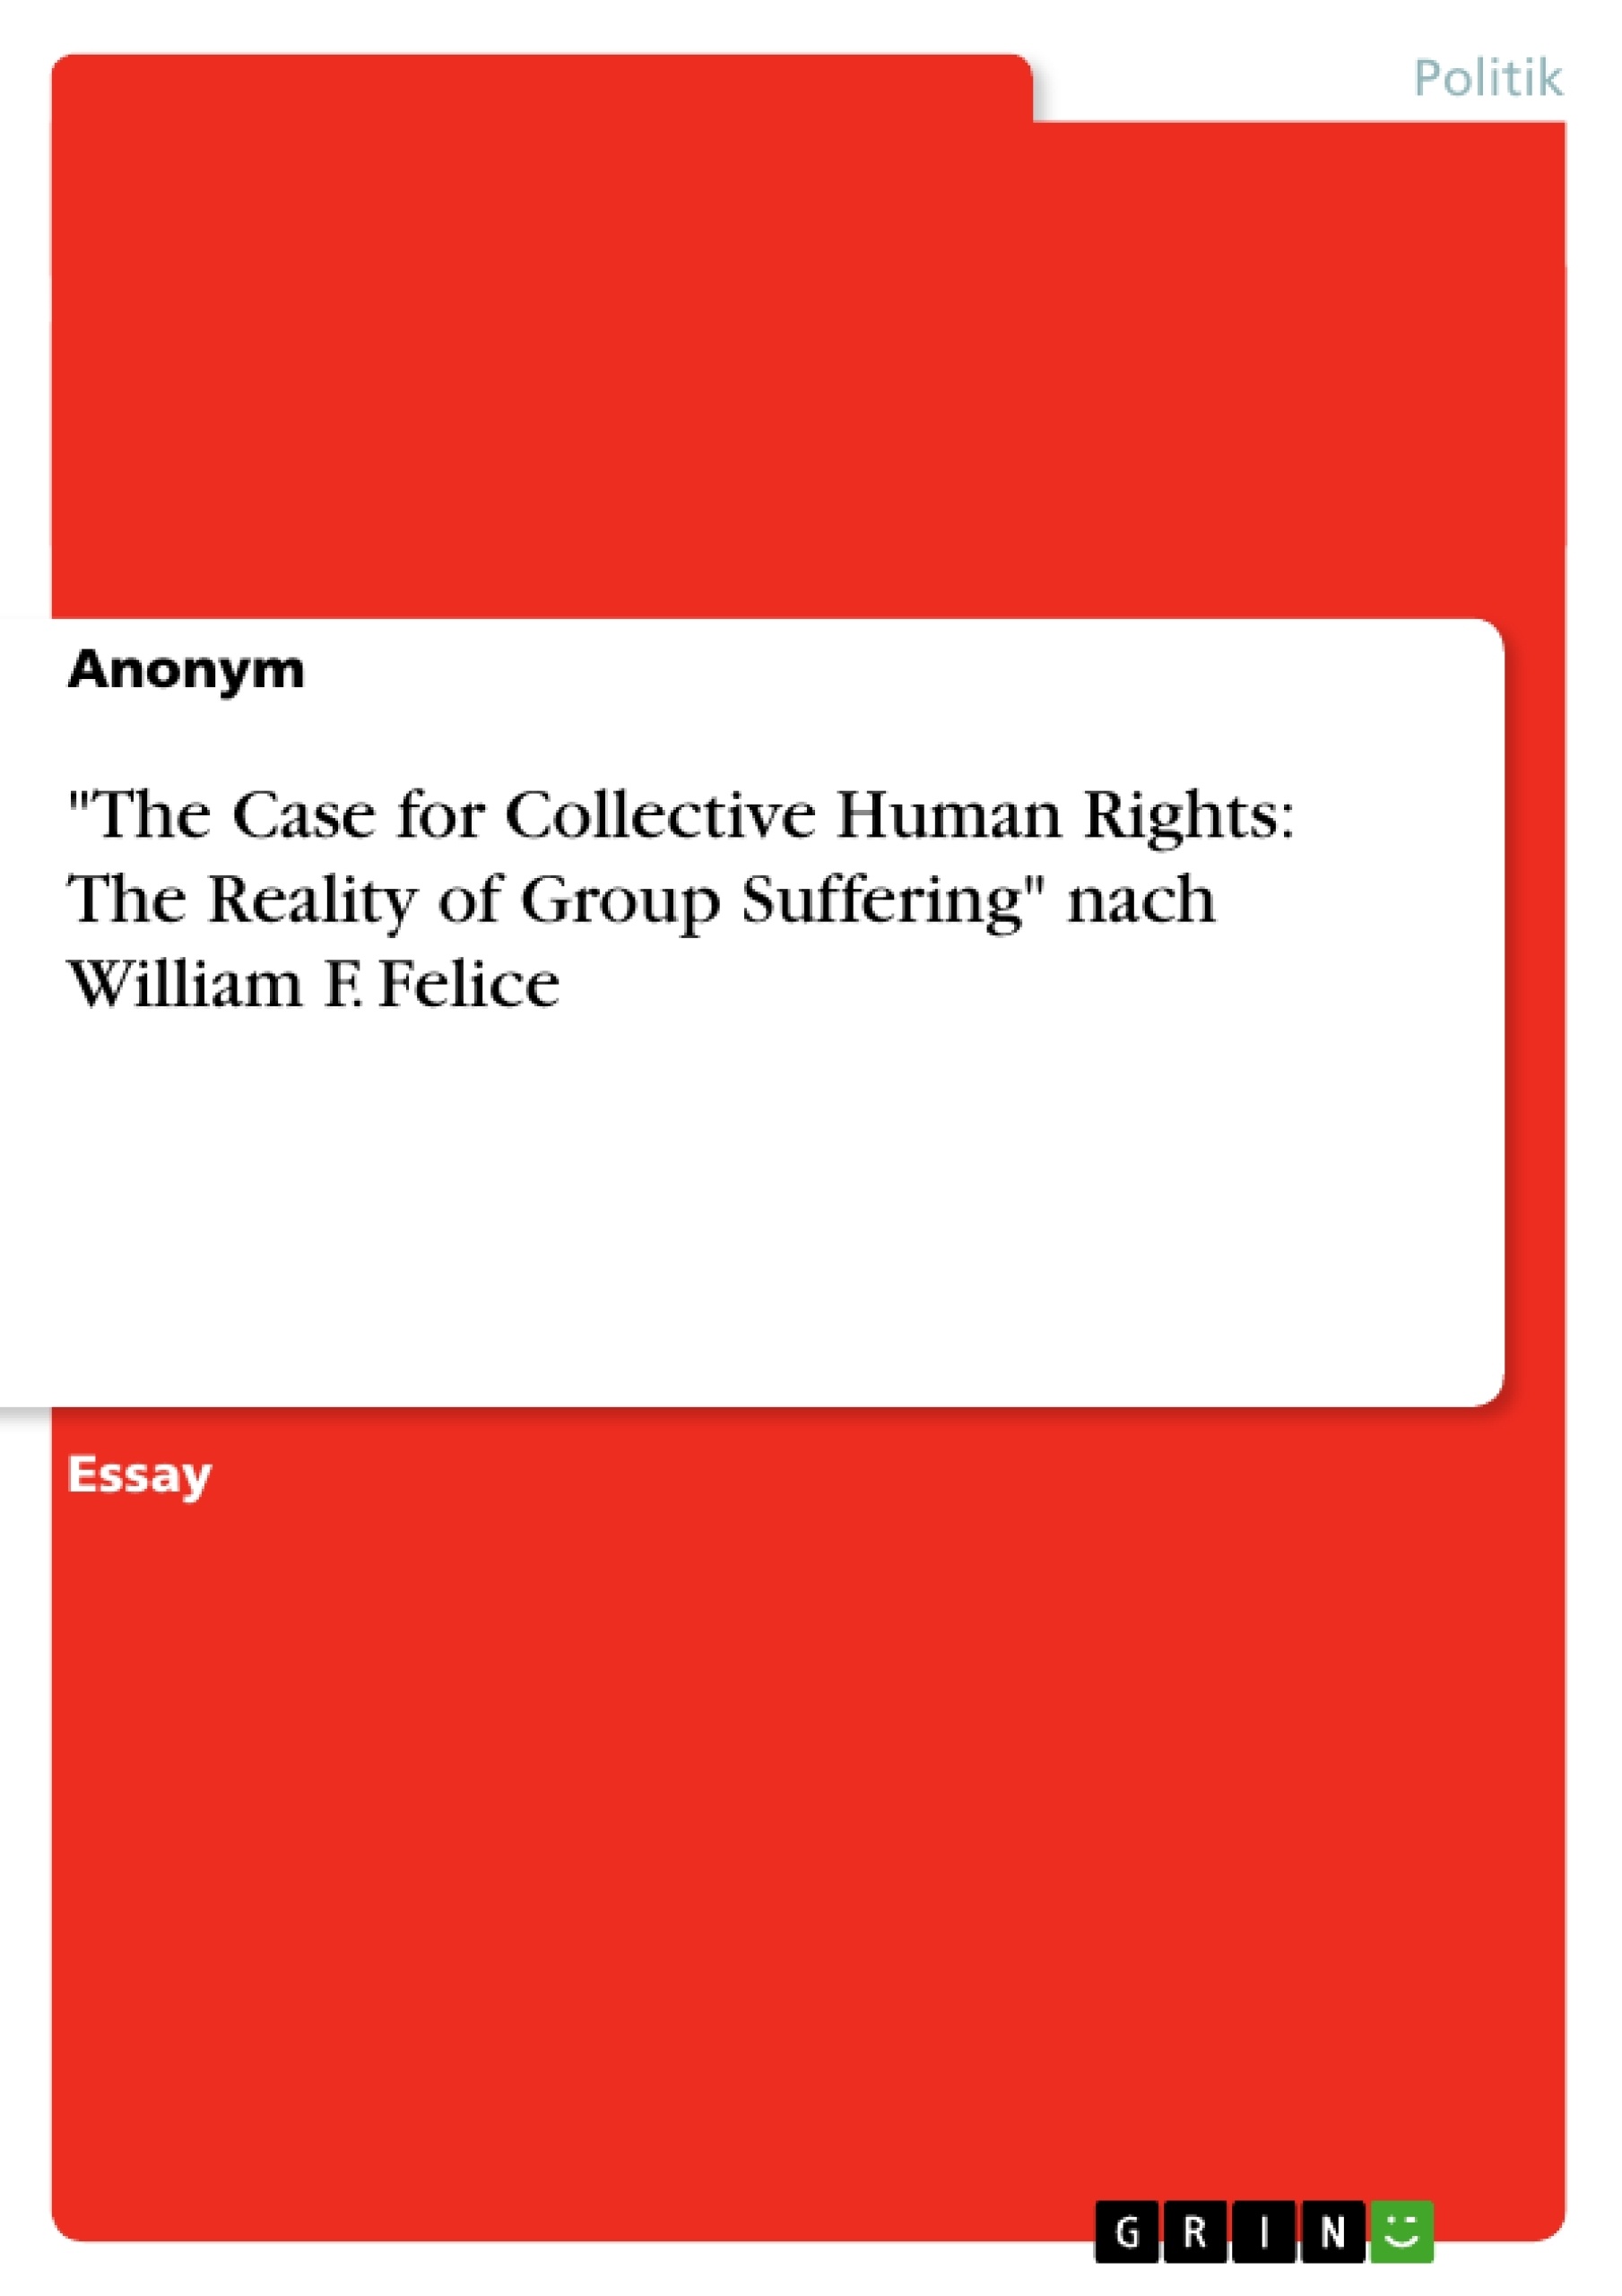 Titre: "The Case for Collective Human Rights: The Reality of Group Suffering" nach William F. Felice